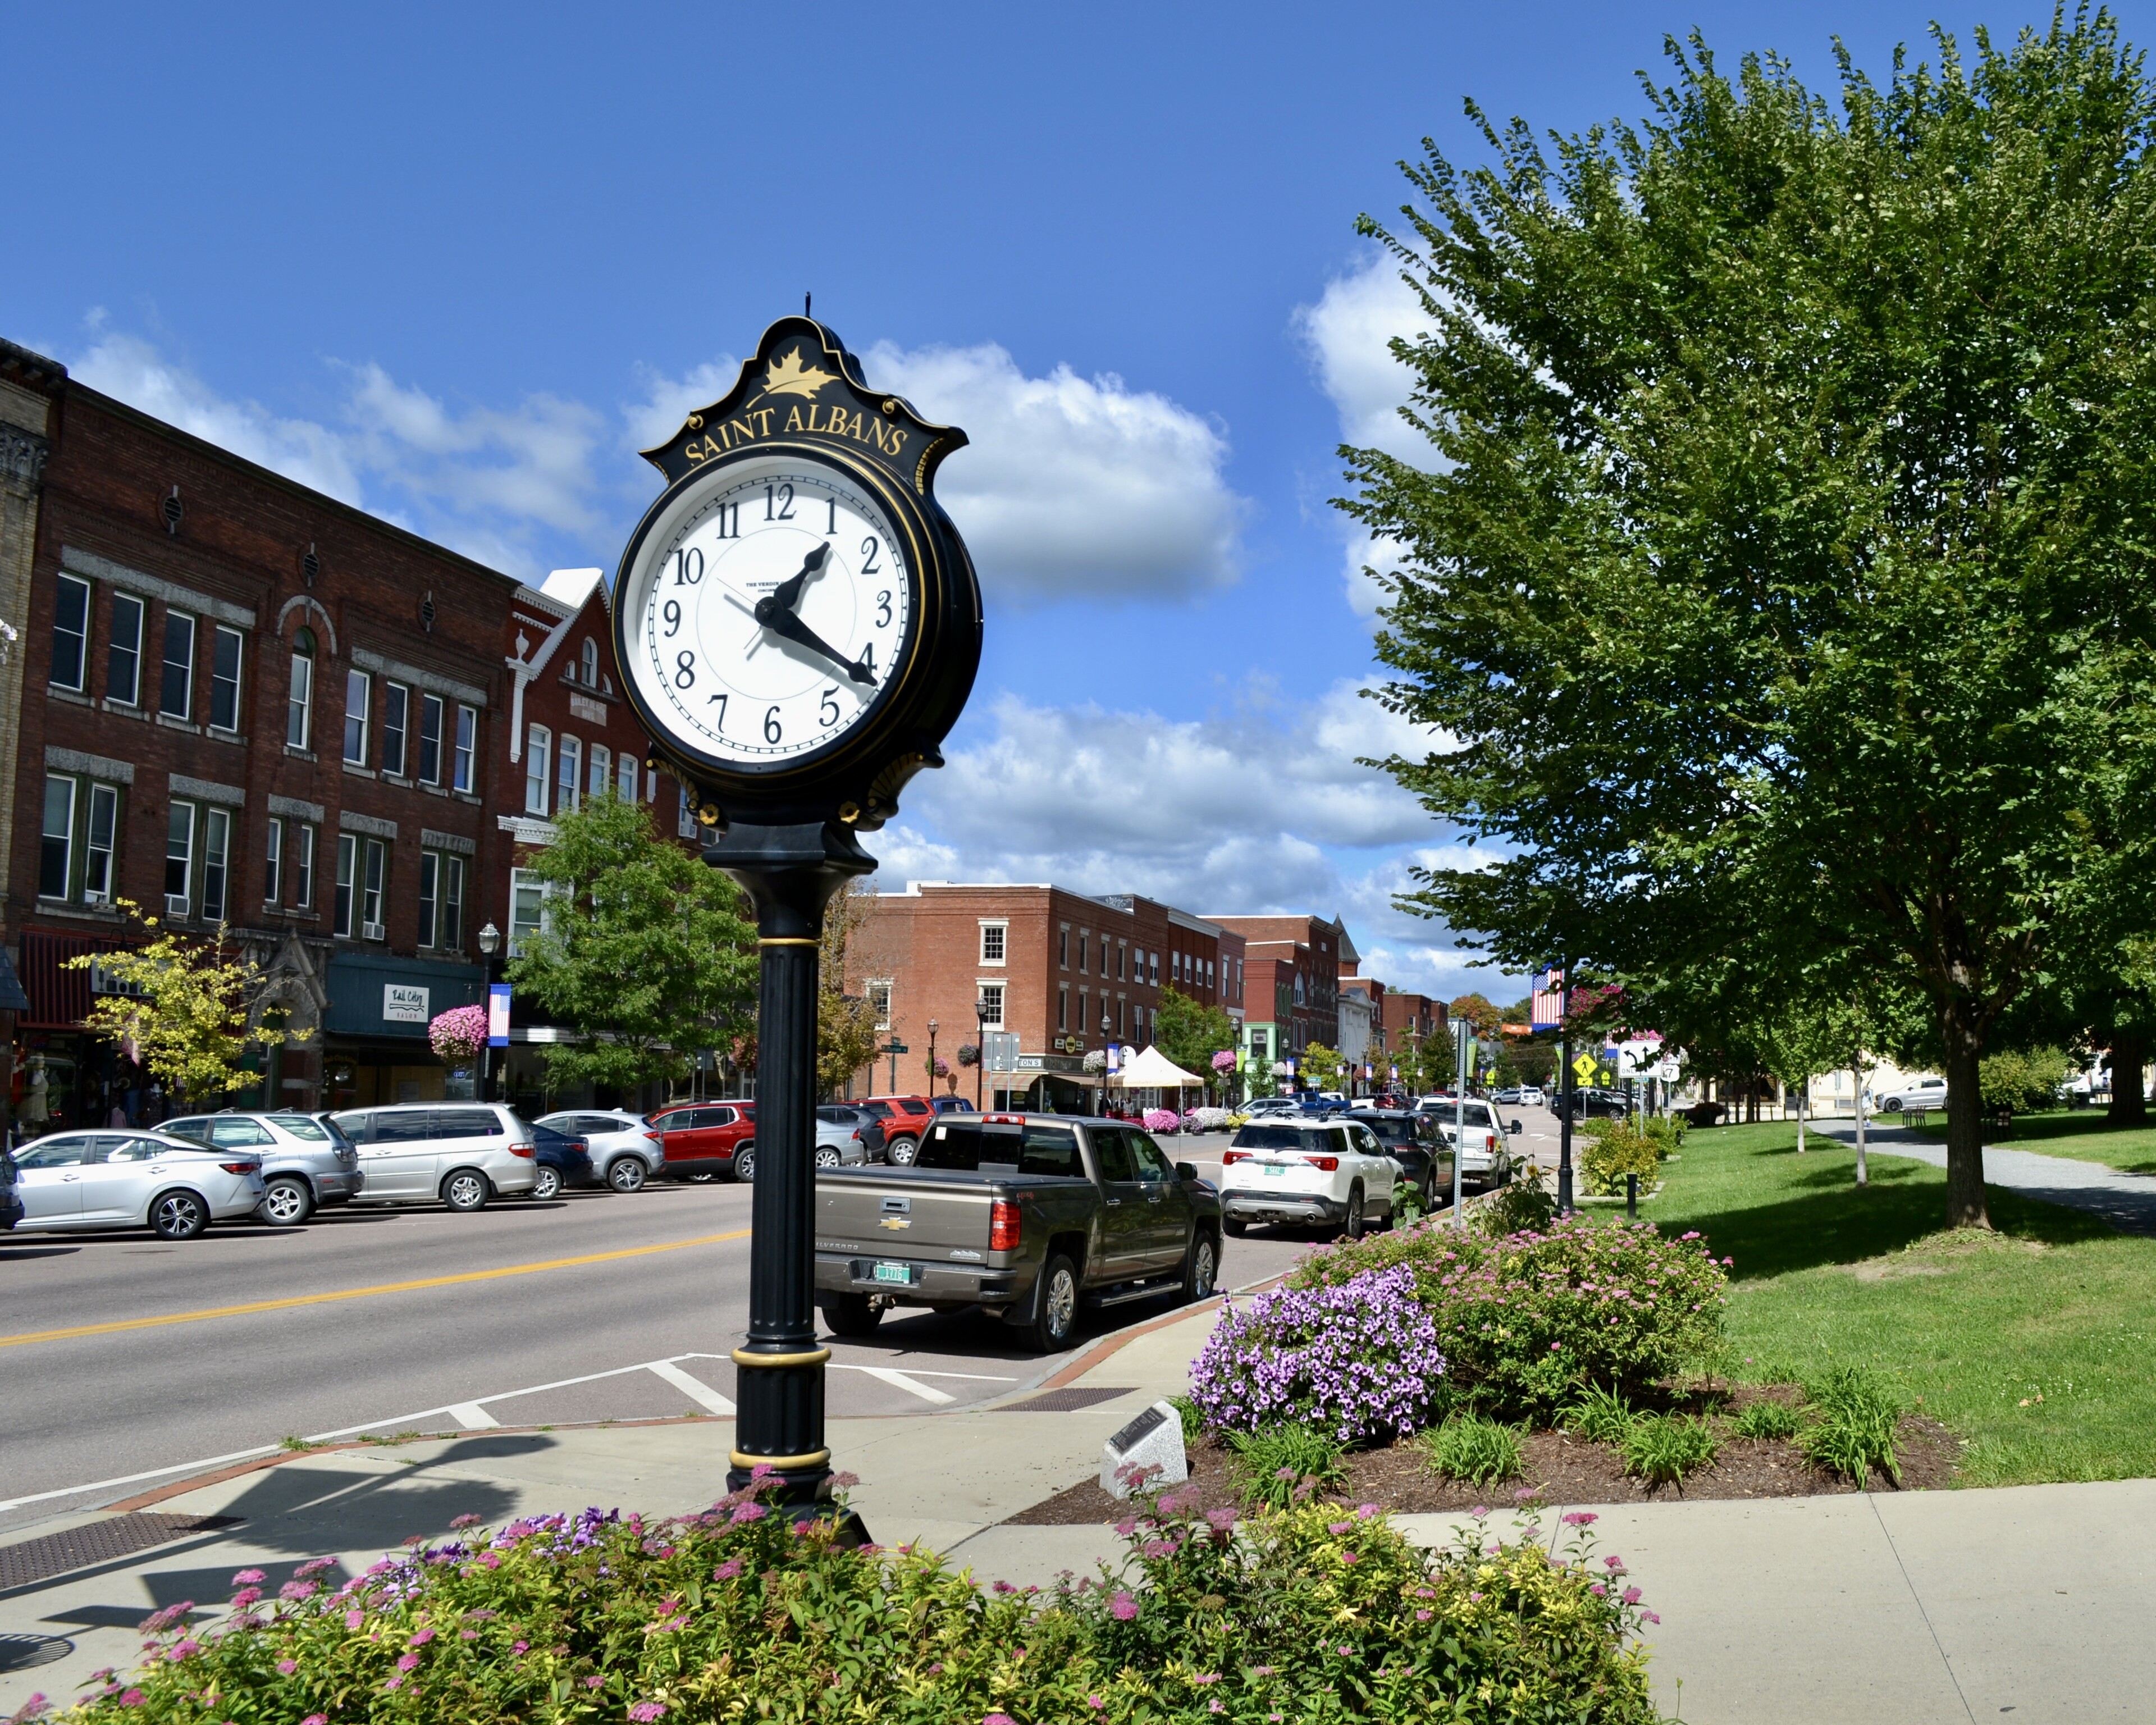 St. Albans clock and downtown